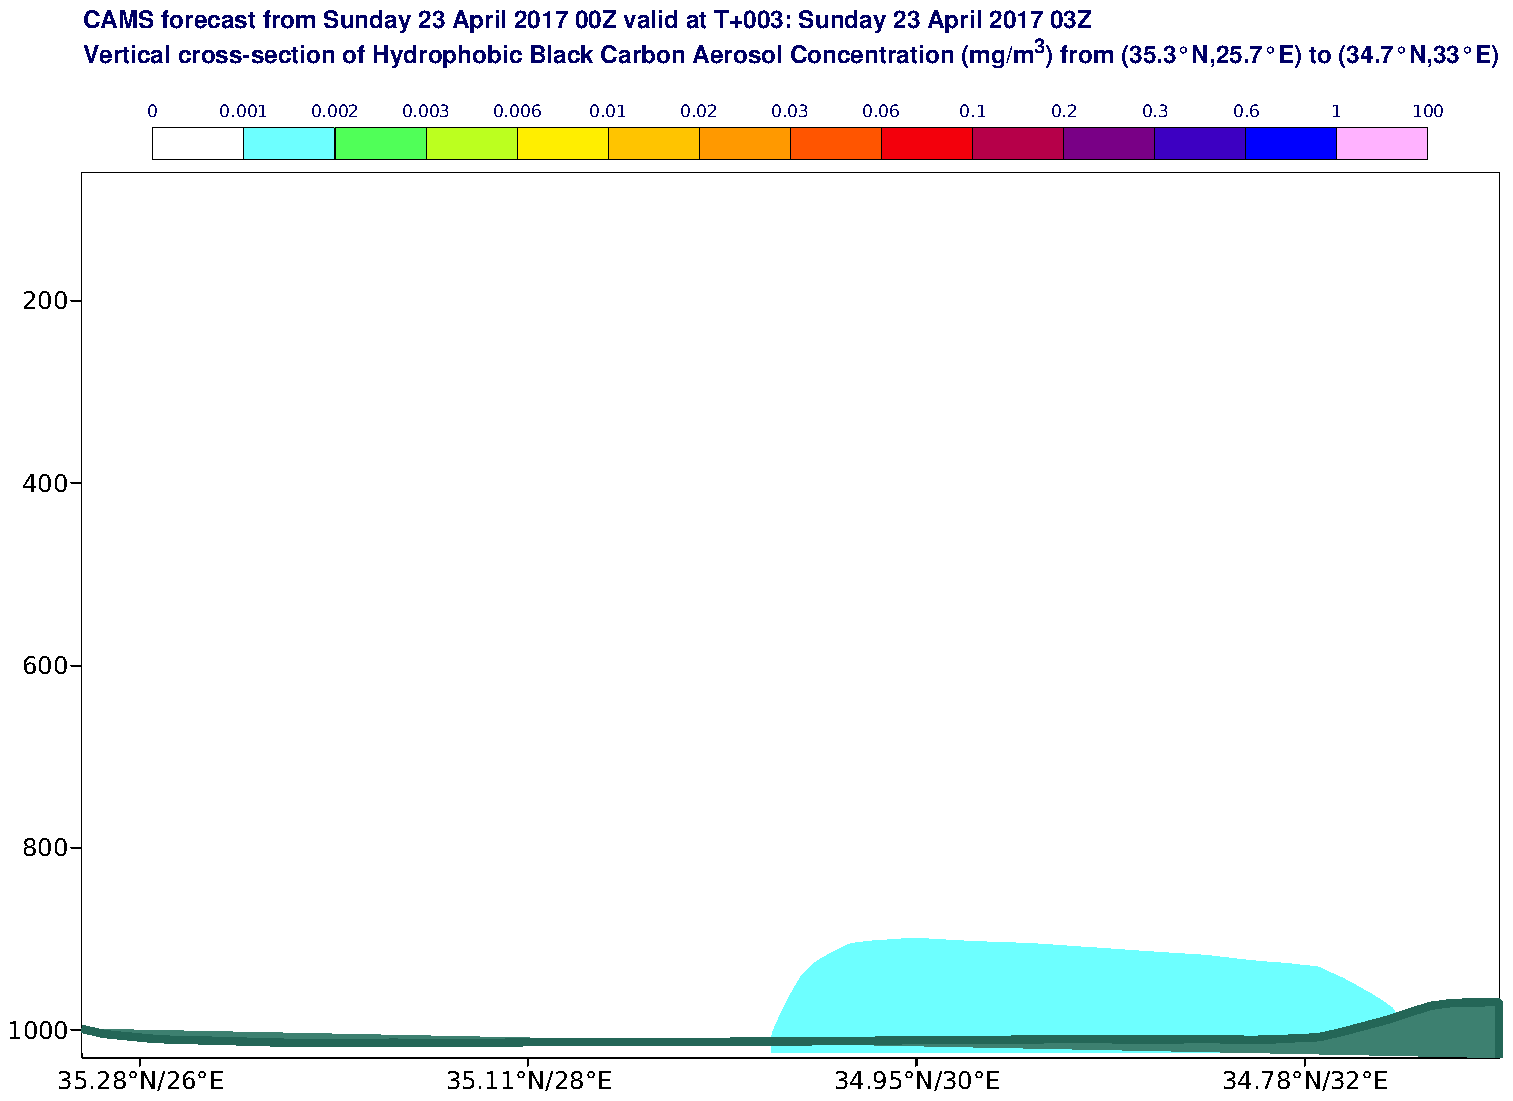 Vertical cross-section of Hydrophobic Black Carbon Aerosol Concentration (mg/m3) valid at T3 - 2017-04-23 03:00